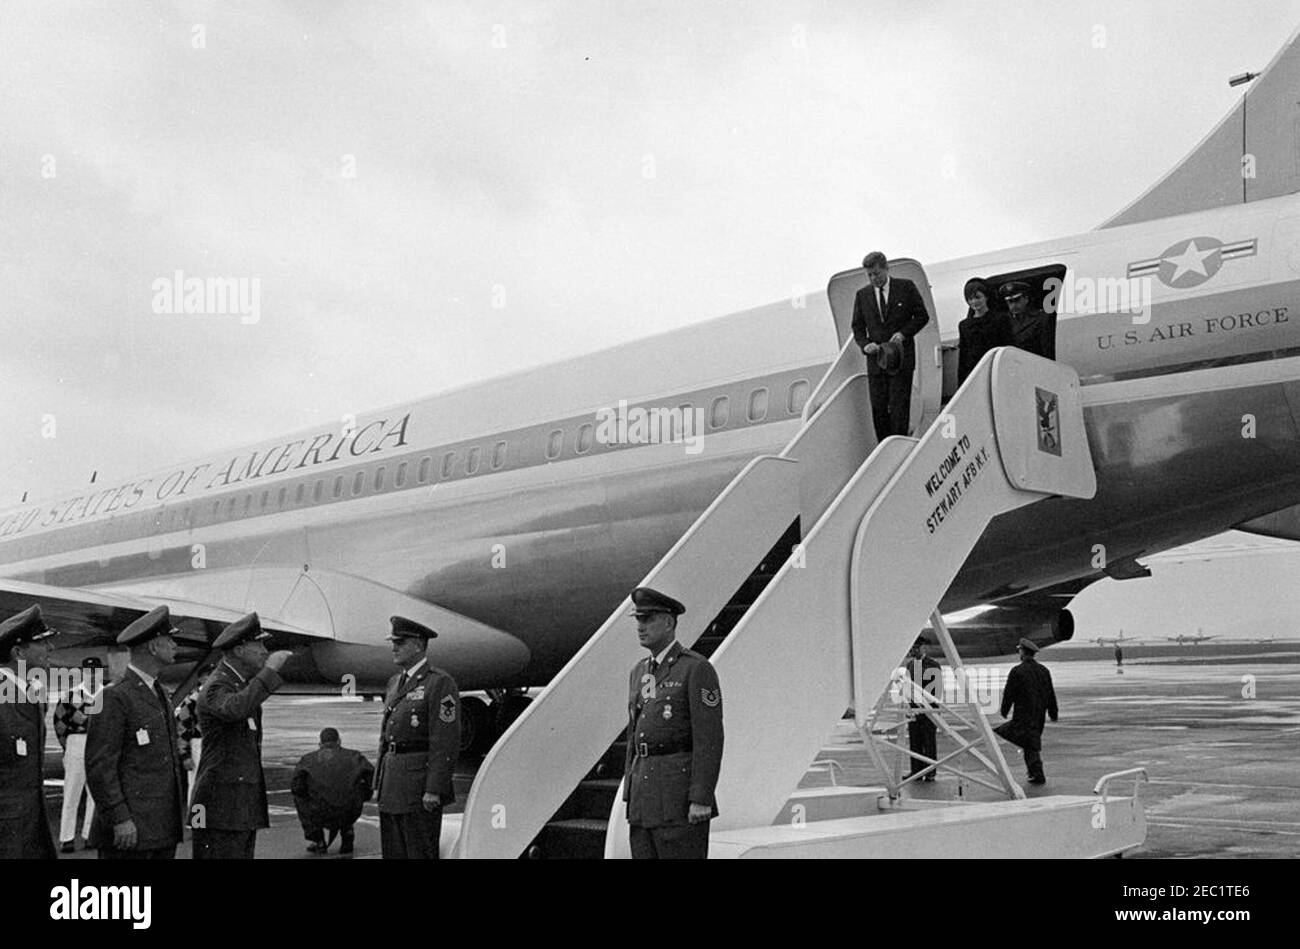 Funeral services for Mrs. Eleanor Roosevelt, Hyde Park, New York. President John F. Kennedy and First Lady Jacqueline Kennedy exit Air Force One upon arrival at Stewart Air Force Base in Newburgh, New York, to attend the funeral of Eleanor Roosevelt in Hyde Park, New York. Air Force Aide to the President, Brigadier General Godfrey T. McHugh, stands in doorway of airplane. Stock Photo